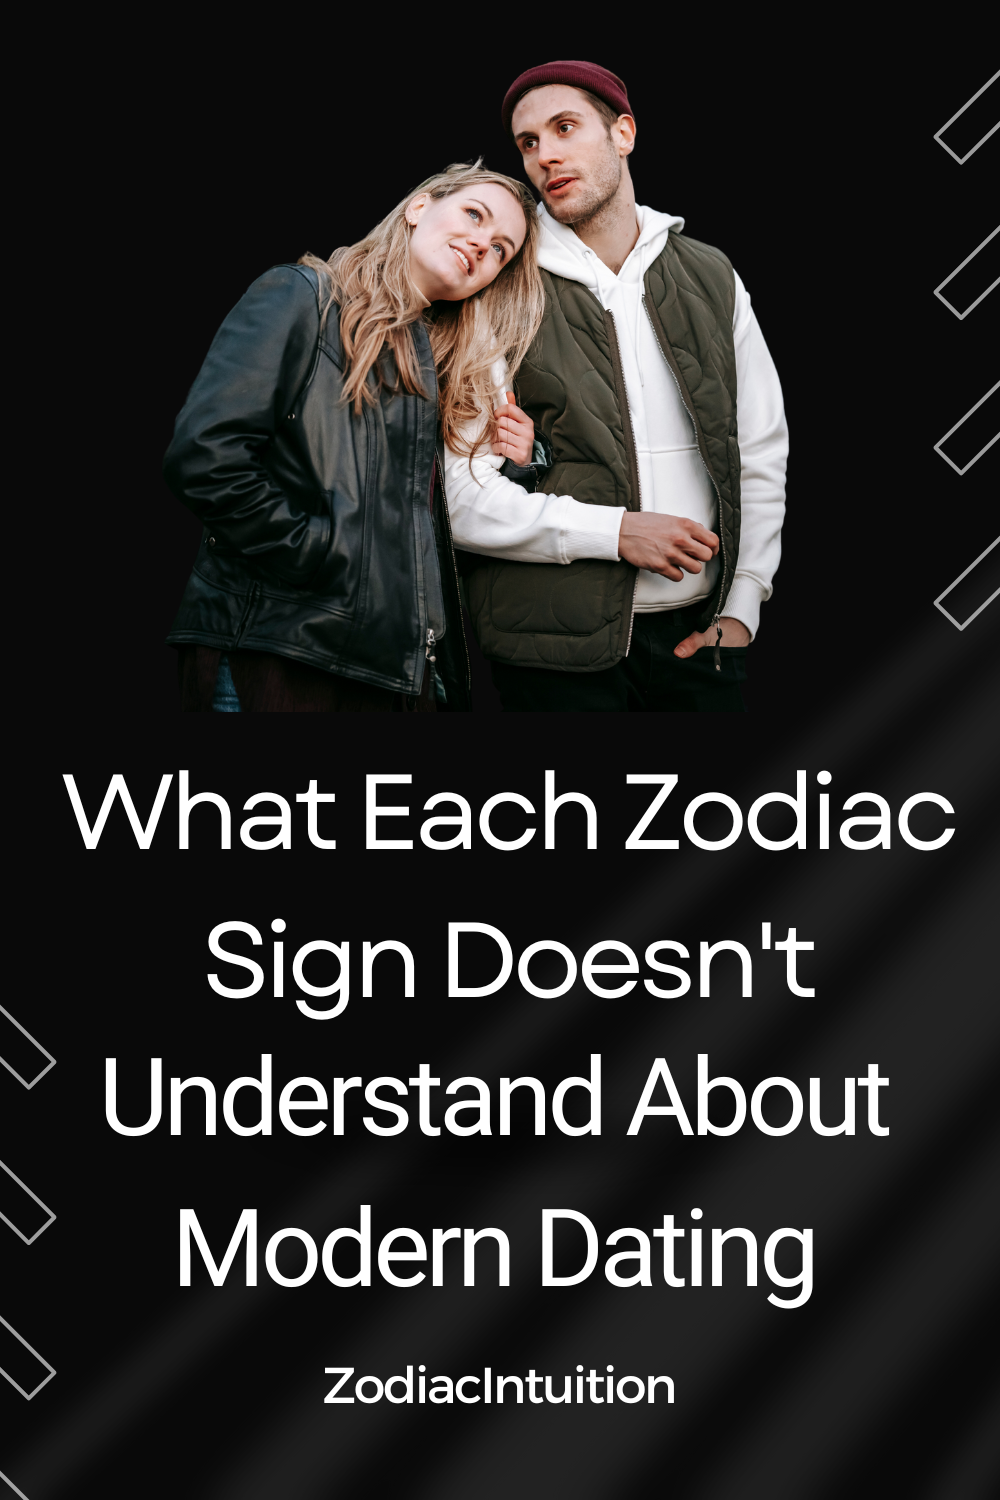 What Each Zodiac Sign Doesn't Understand About Modern Dating